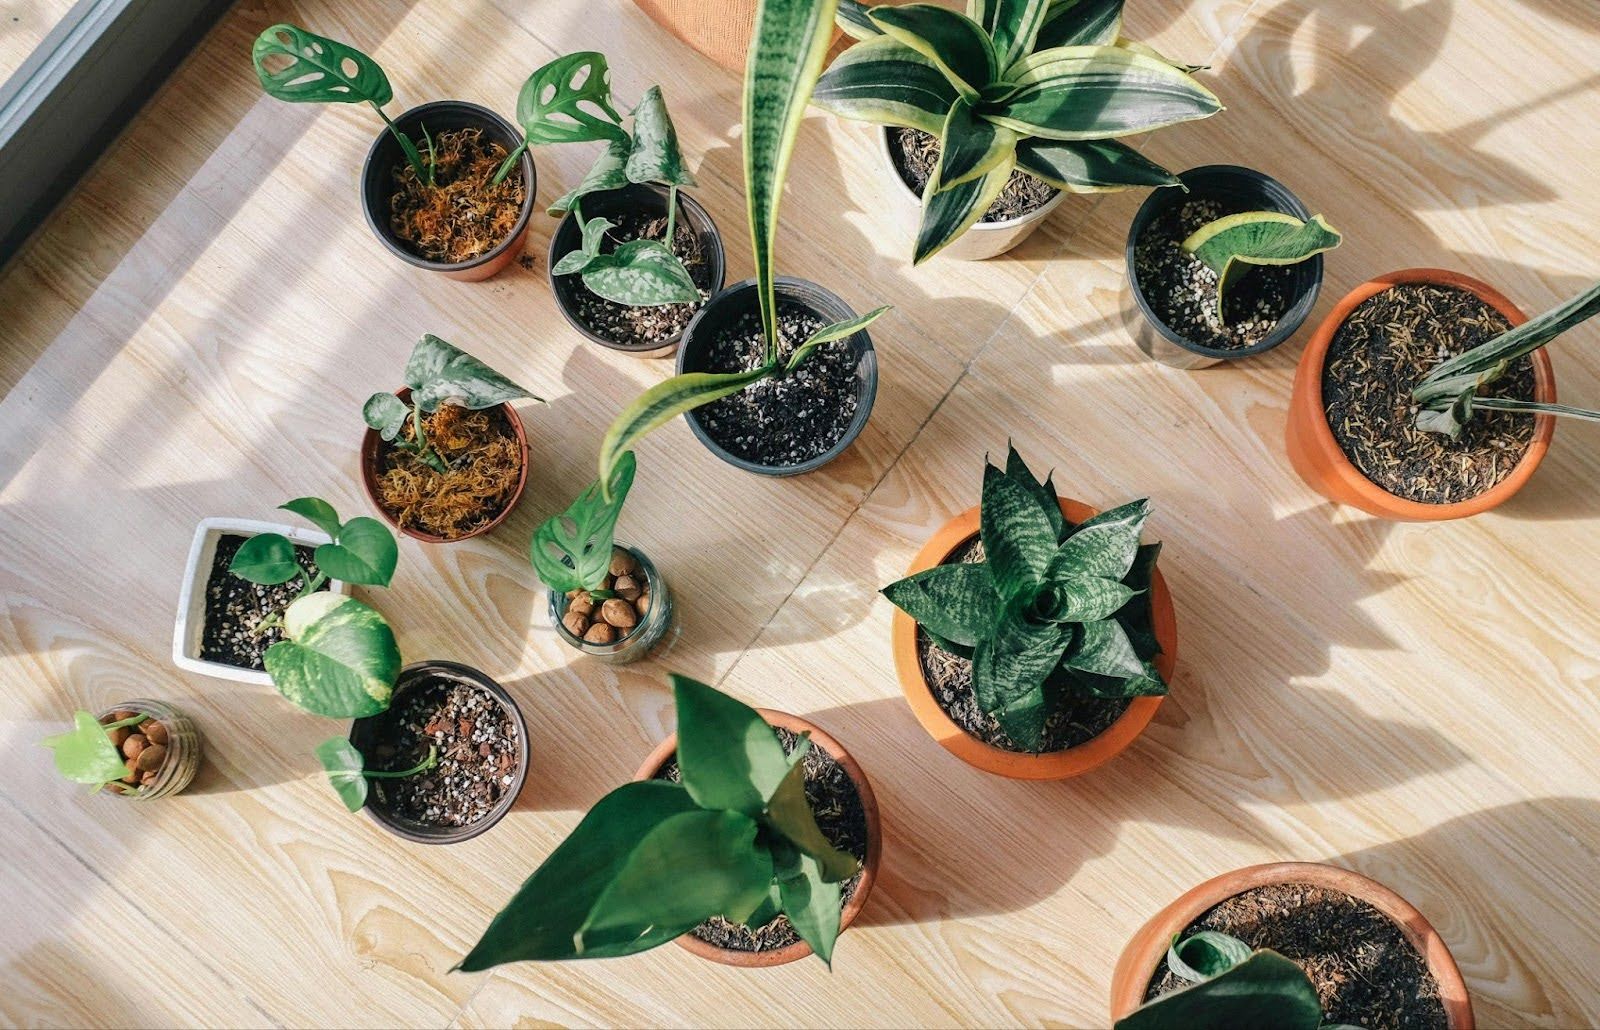 Houseplants on the floor of an apartment.